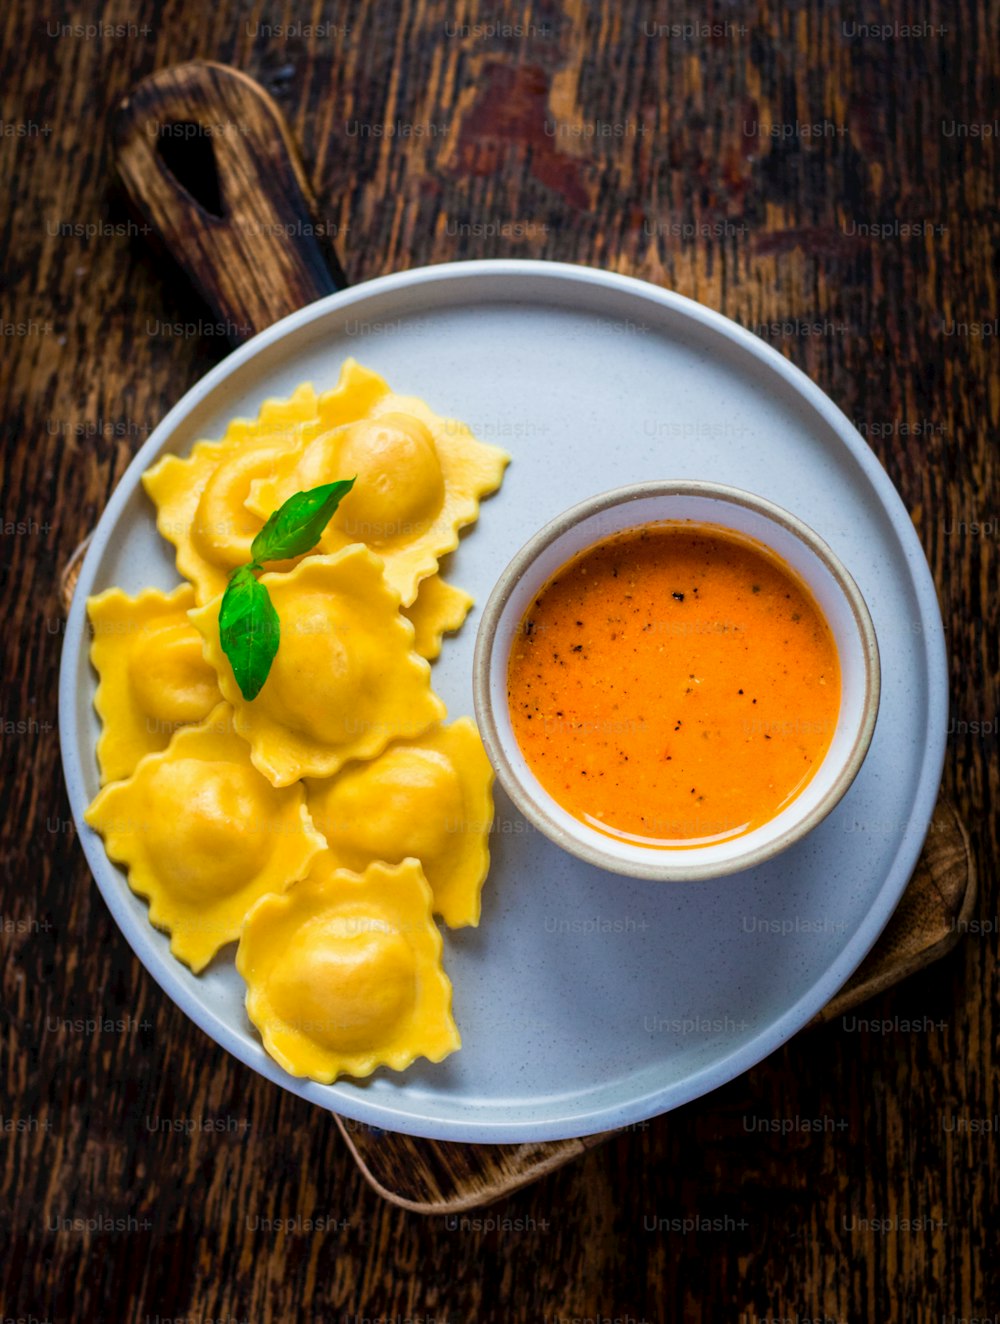 a plate of ravioli and sauce on a wooden table